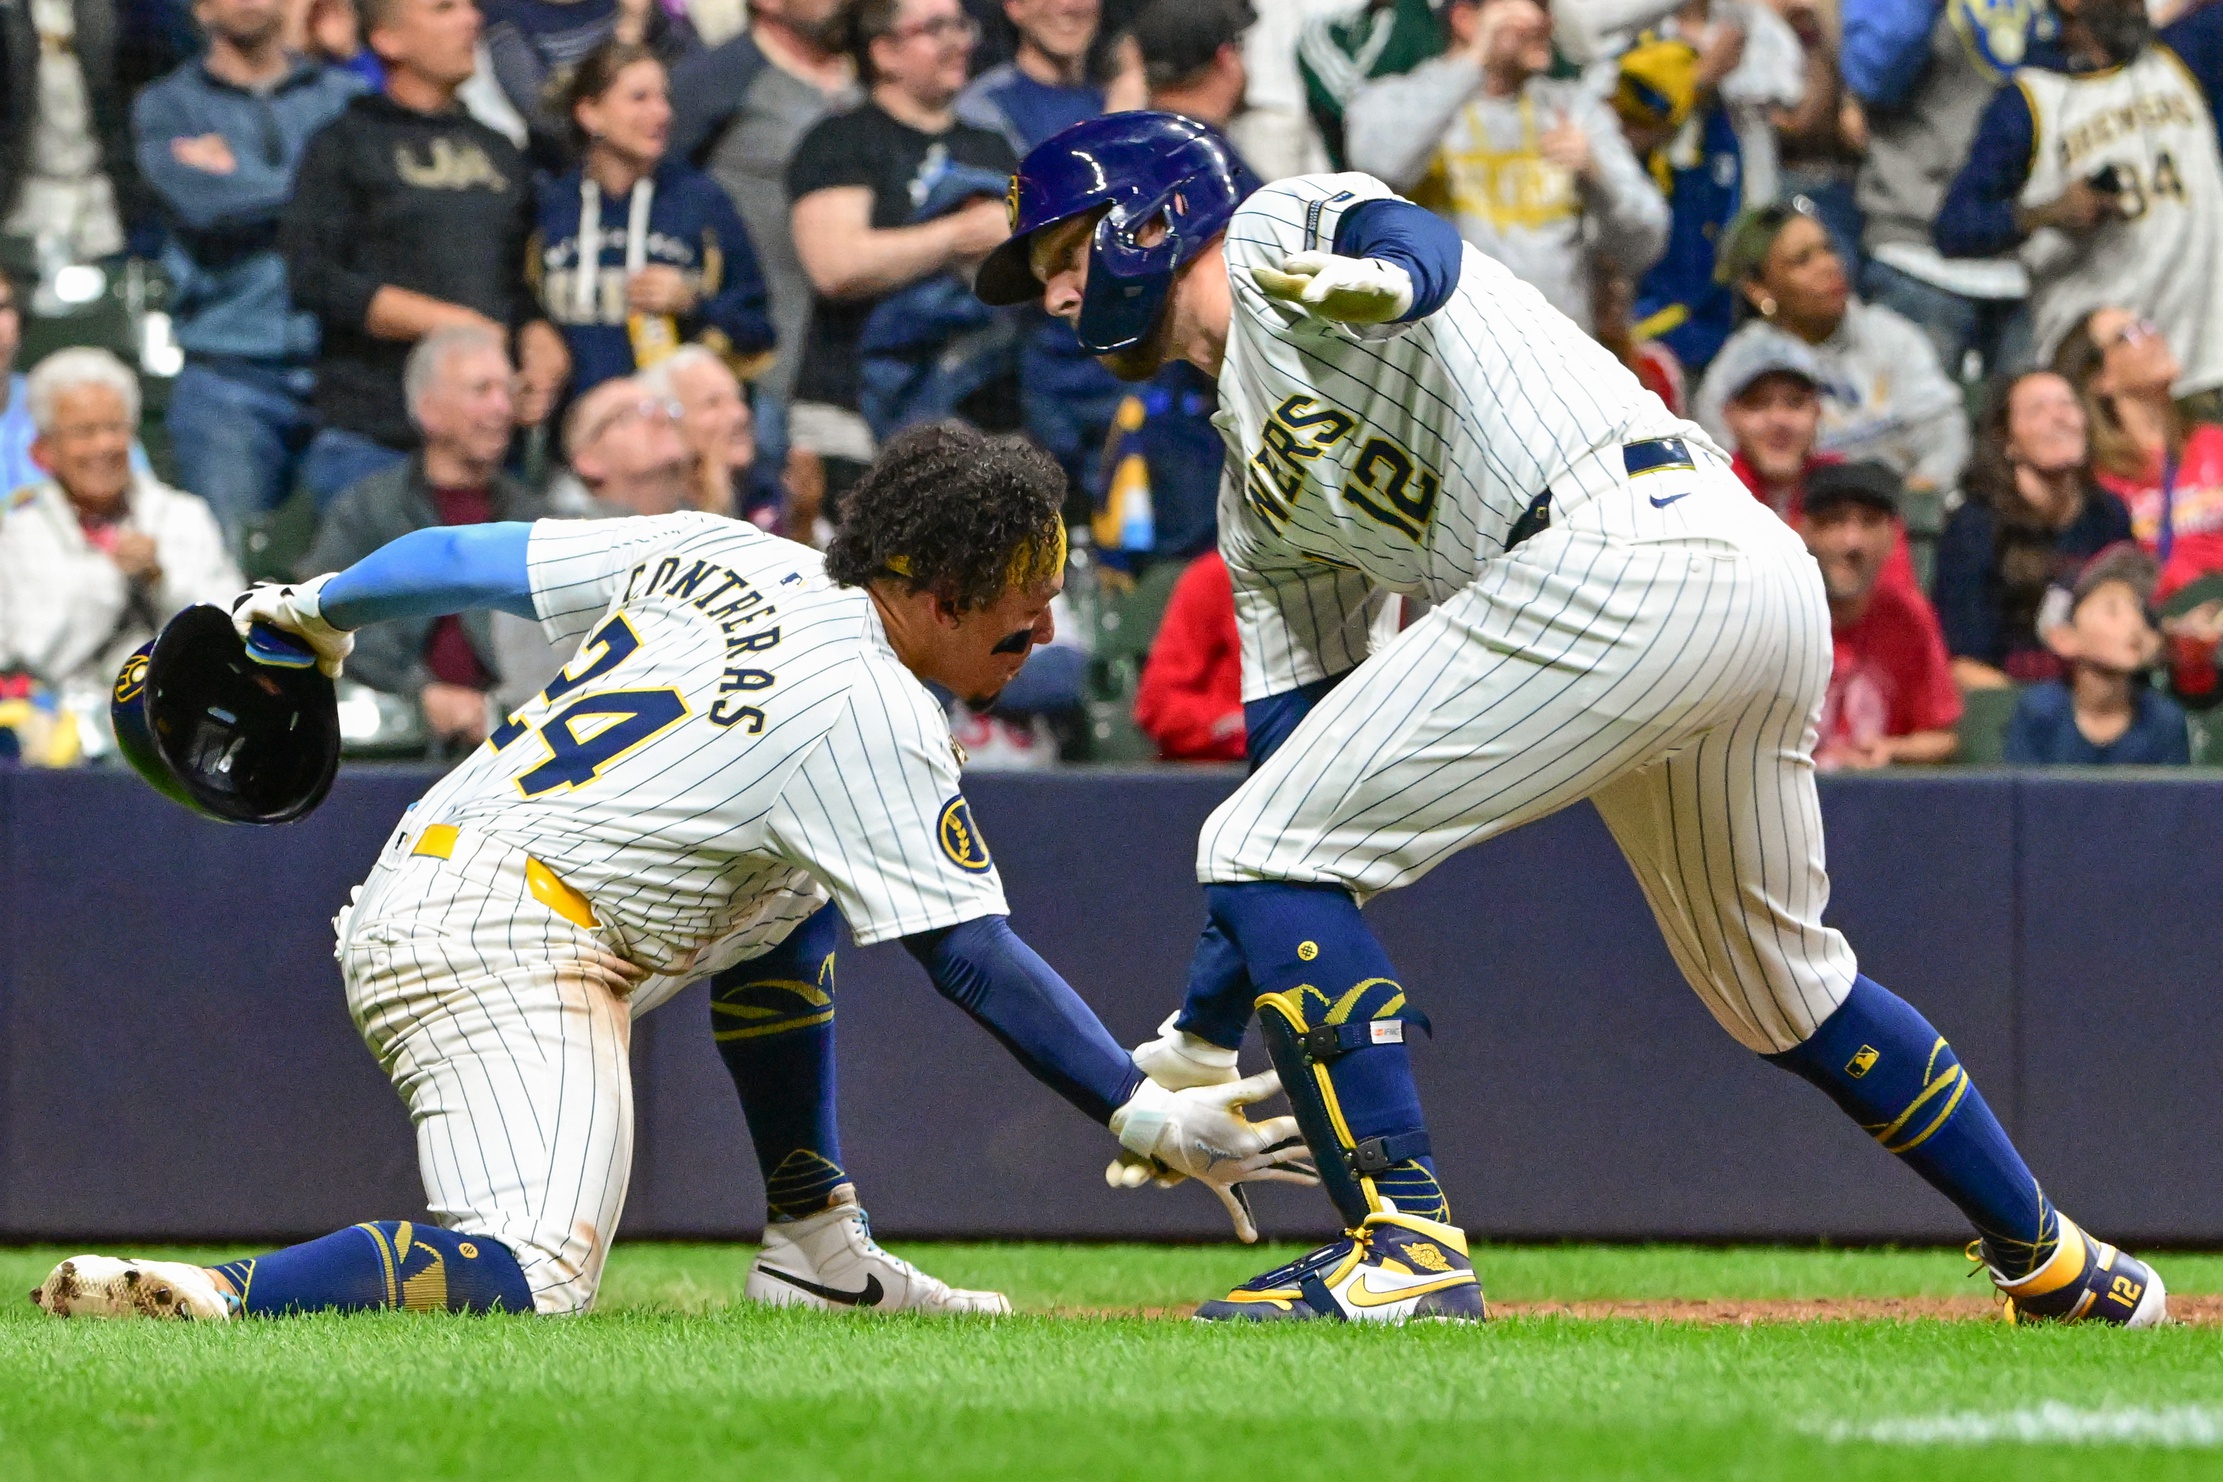 Free-Agent Signing Continues Paying Off for Brewers